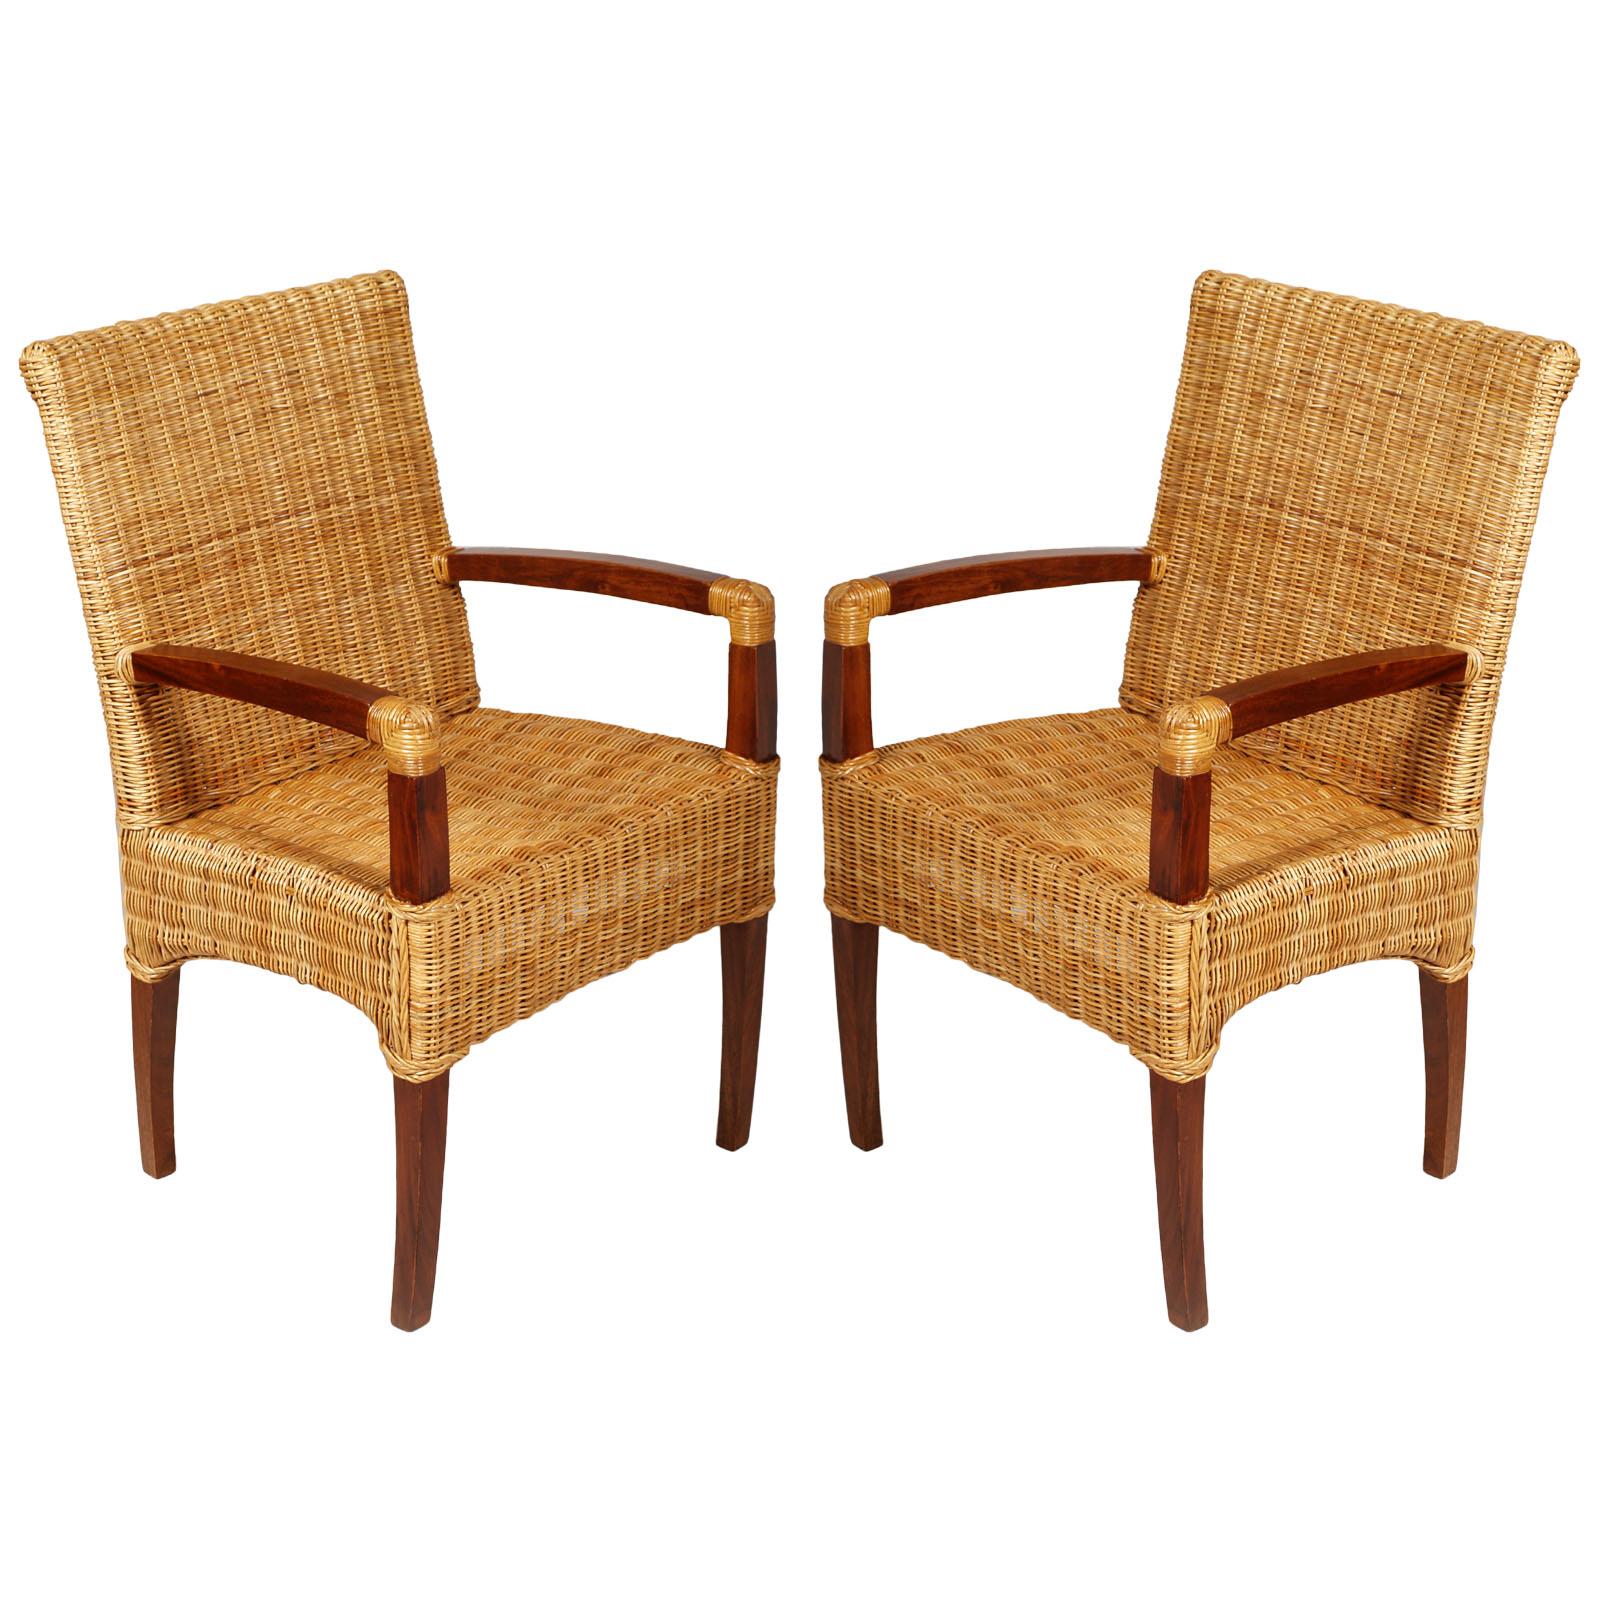 Pair of Fine French Art Deco Chairs in the Style of Jules Leleu Restored